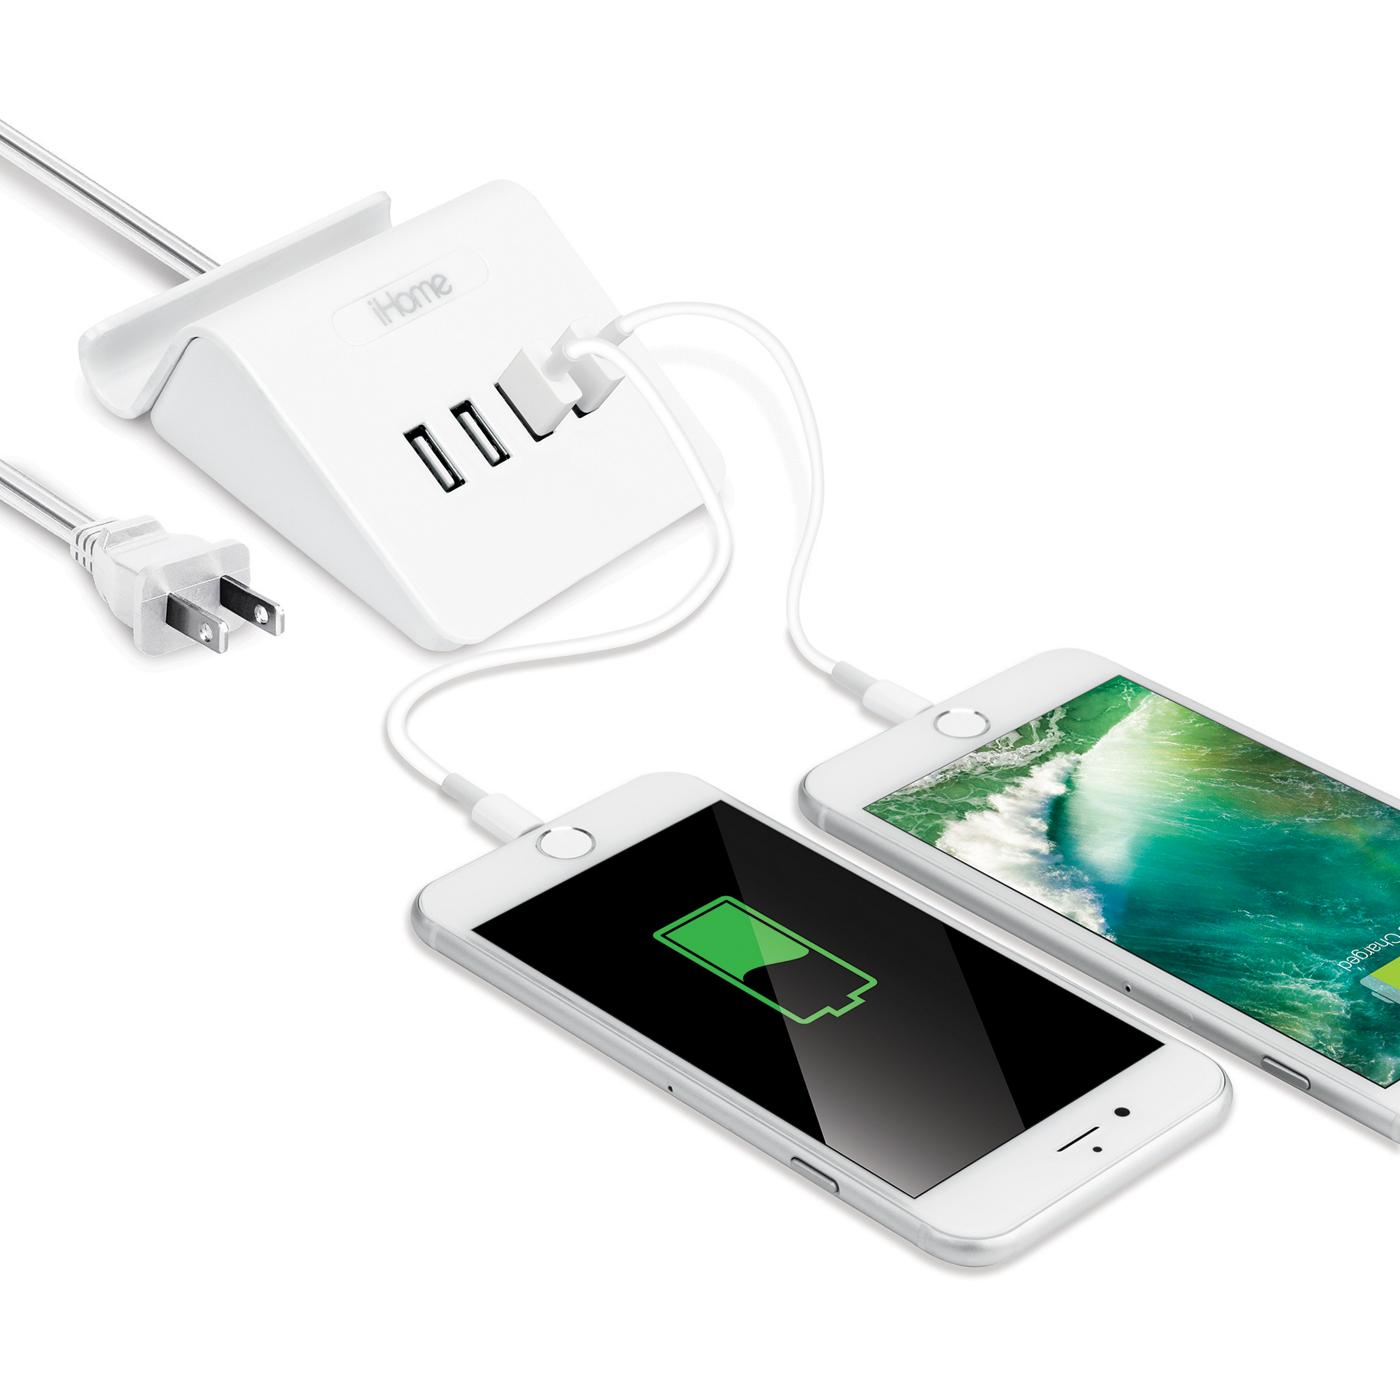 iHome 4-Port USB Charging Stand - White; image 2 of 2